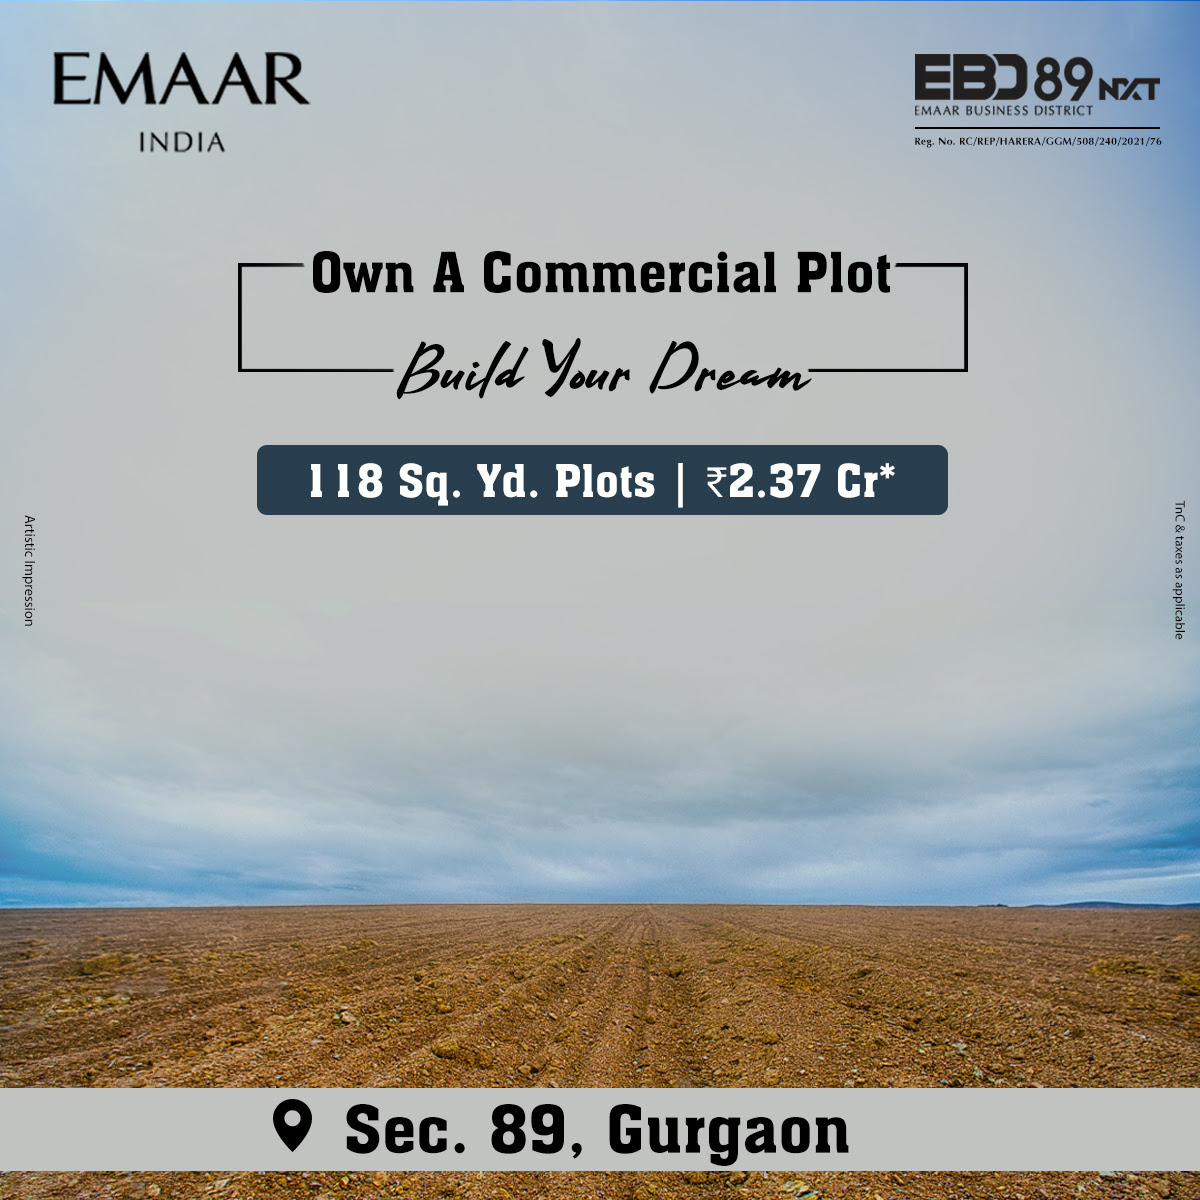 Own a commercial plot 118 Sqyd Rs 2.37 Cr onwards at EBD 89 Nxt, Gurgaon